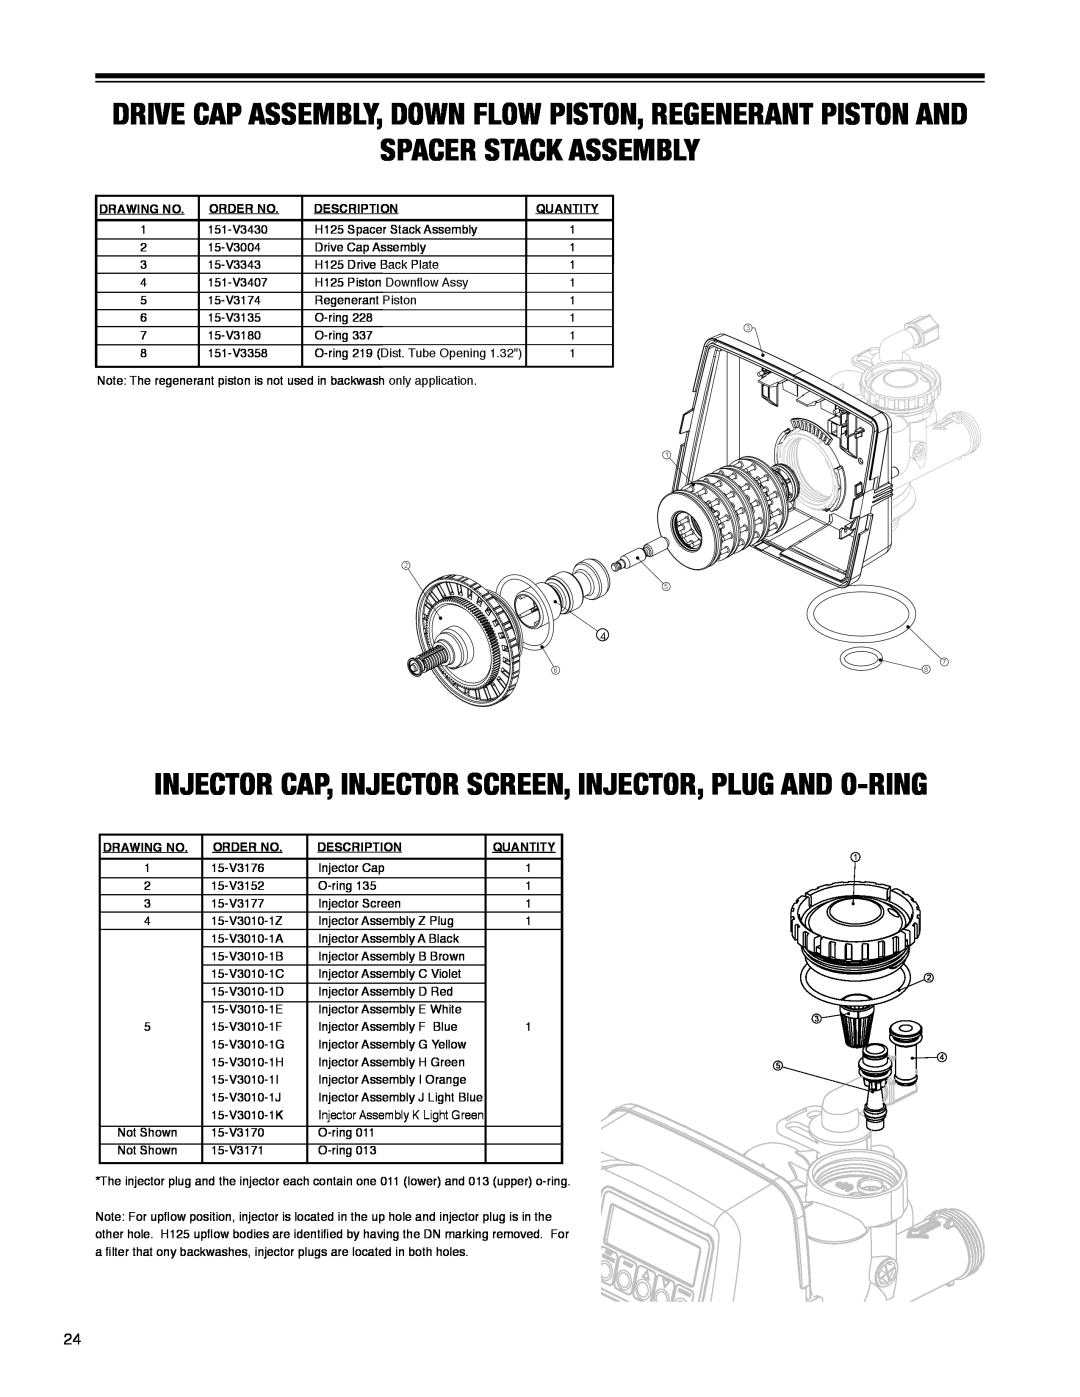 Argosy Research H-125 Series owner manual Spacer Stack Assembly, Injector Cap, Injector Screen, Injector, Plug And O-Ring 